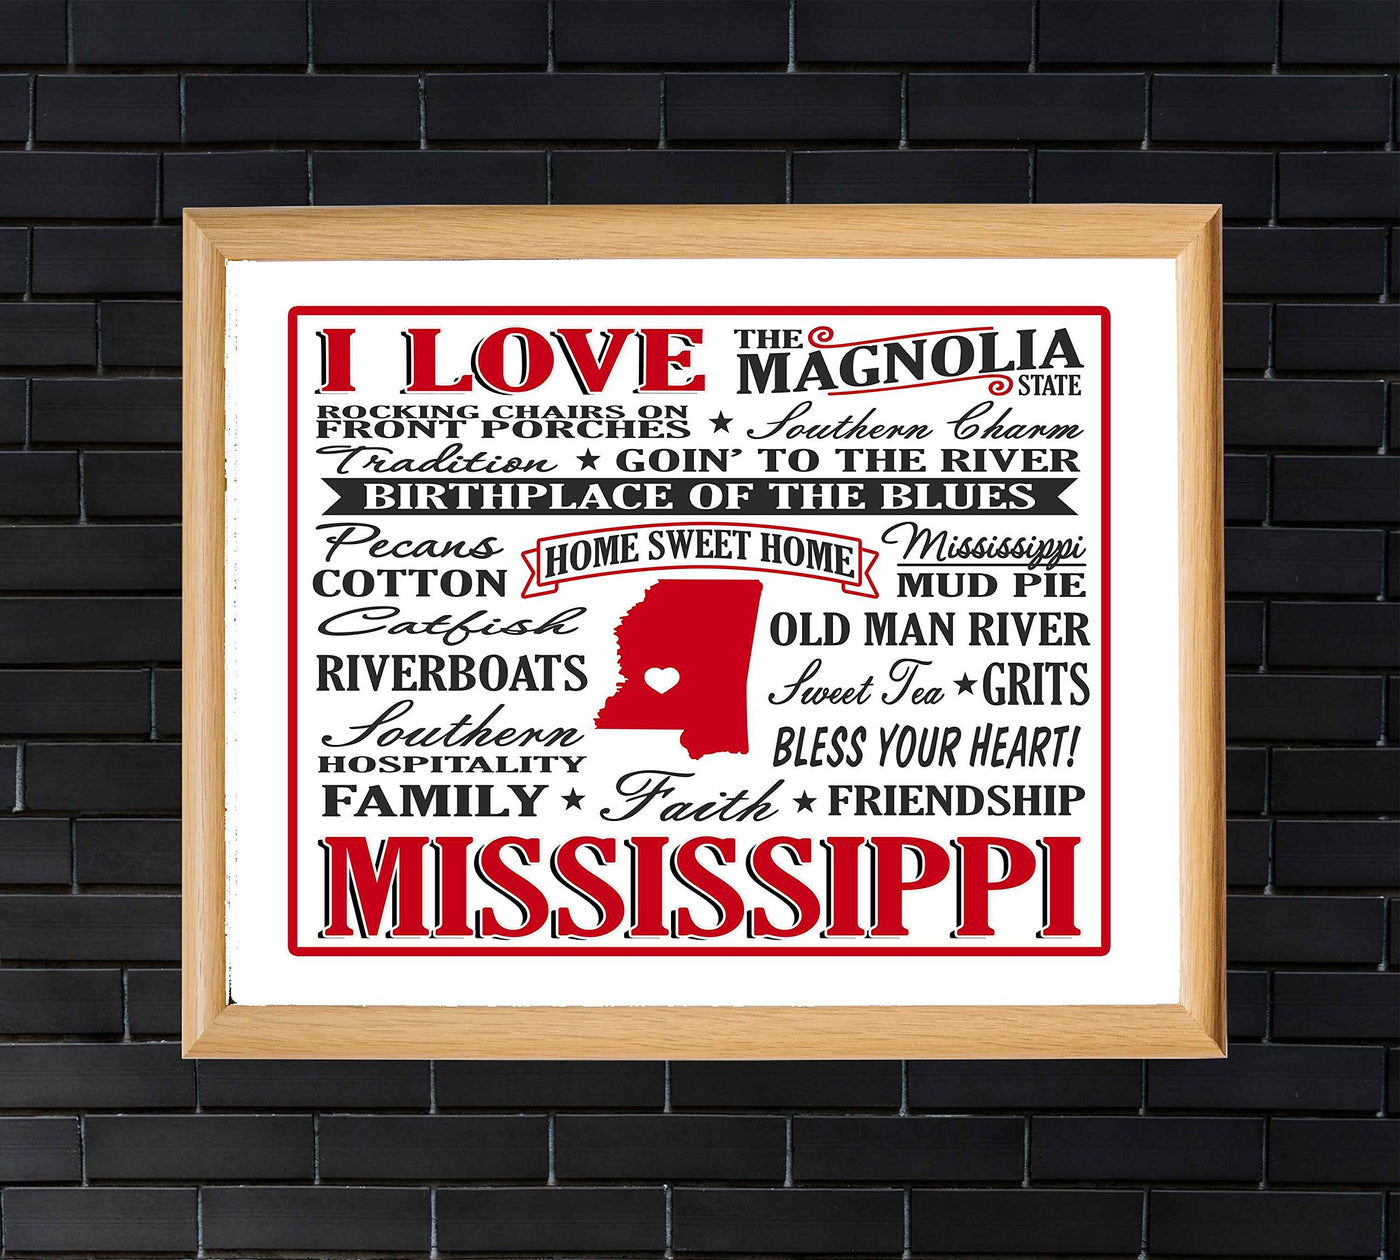 I Love Mississippi Because- Word Art Wall Sign- 10 x 8" -Vintage Typographic Poster Print-Ready to Frame. Perfect Decor for Home-Office-Studio-Bar-Cafe-Dorm. Great Display of State Pride!